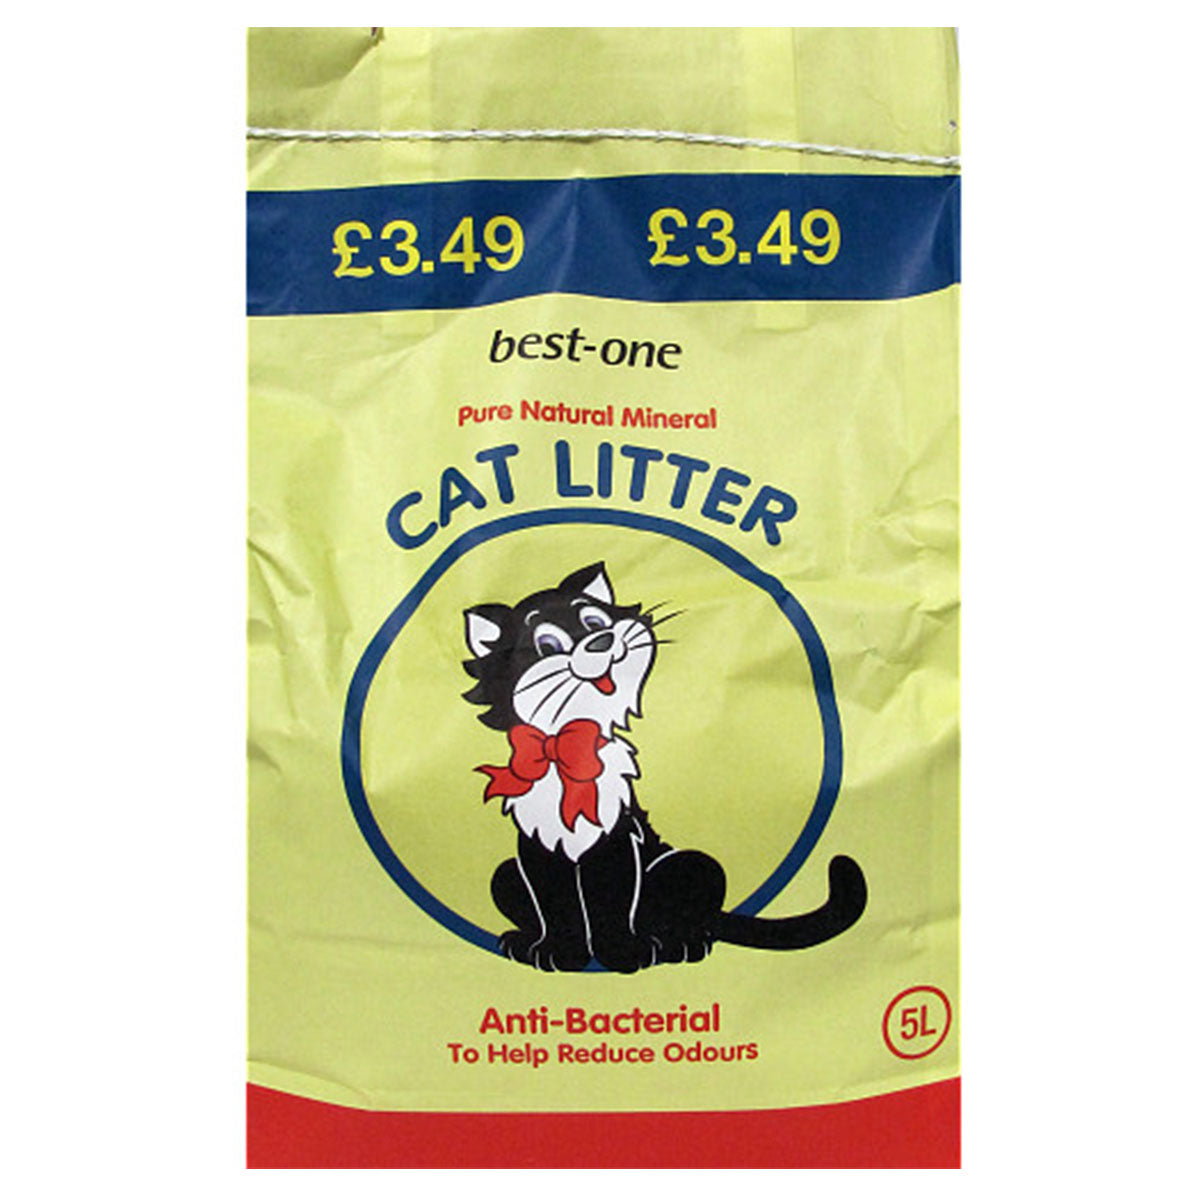 Best One - Anti Bacterial Cat Litter - 5L - Continental Food Store